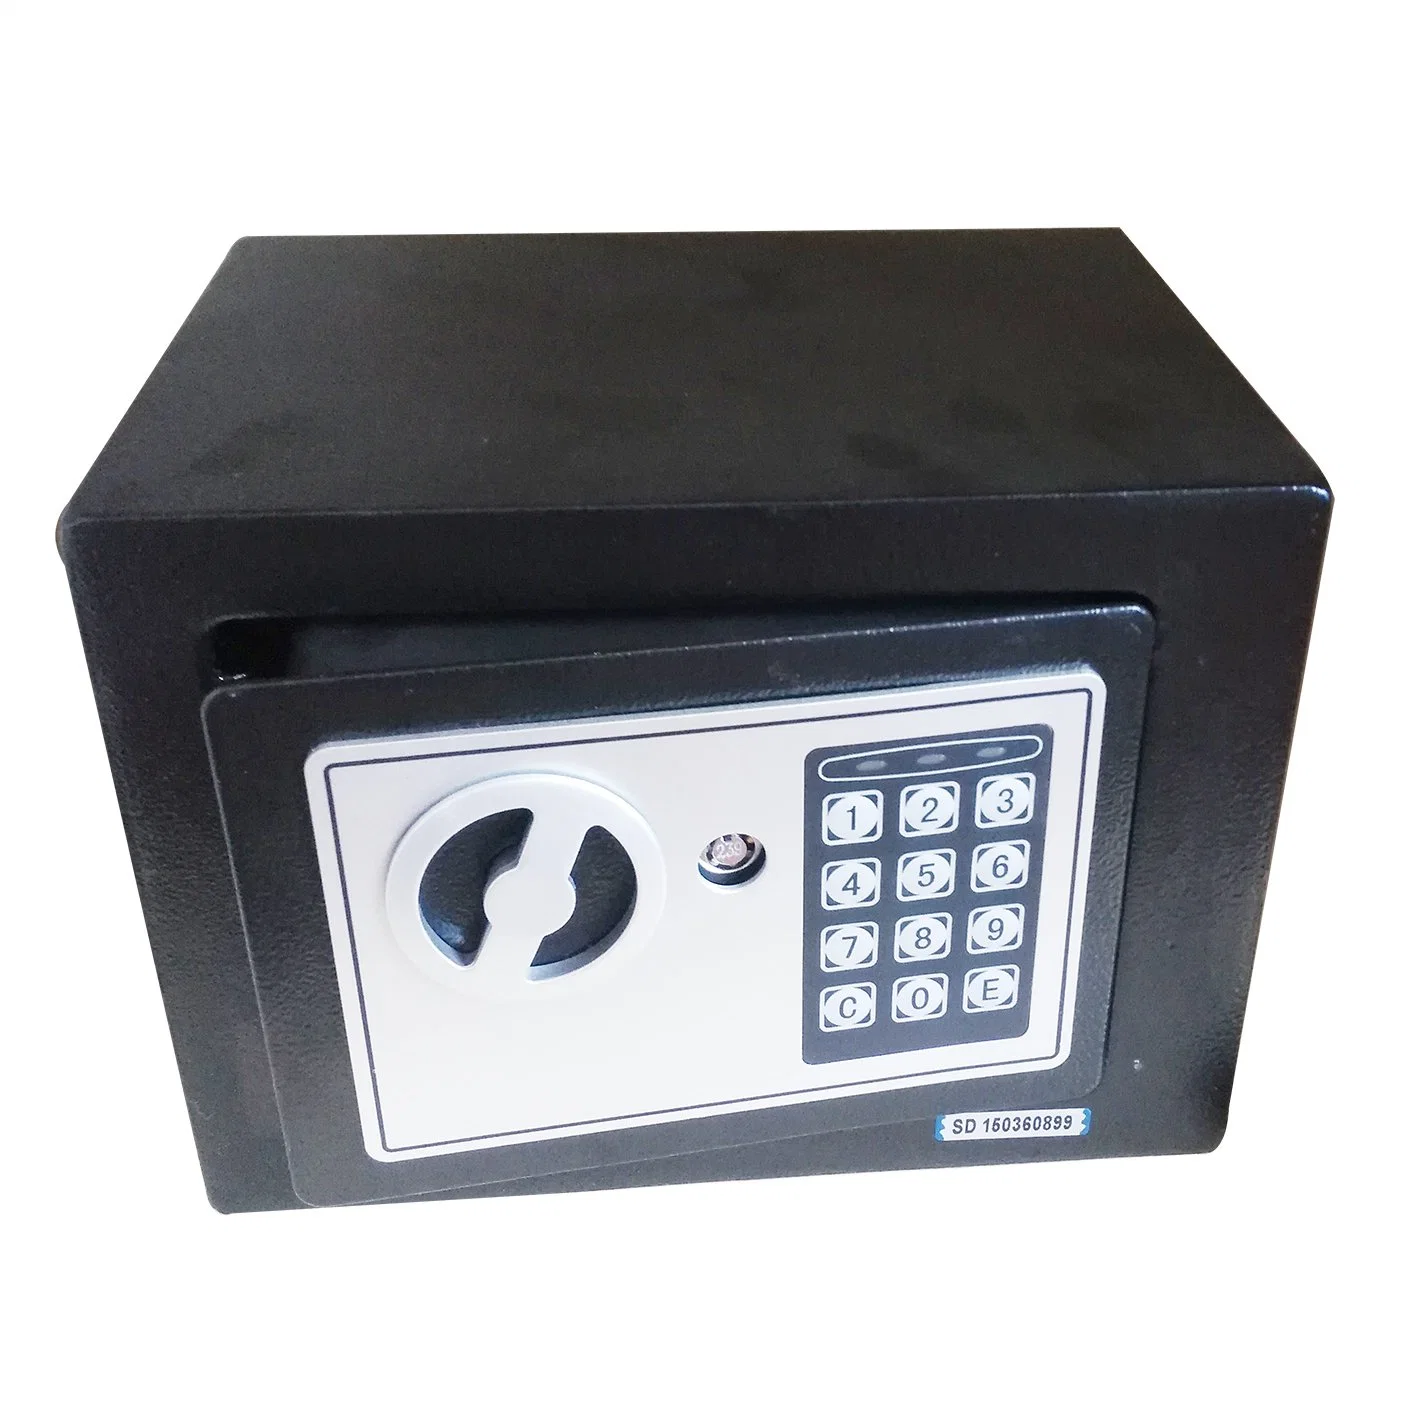 Digital Keypad Electronic Password Home Safe Box for Secure Valuables